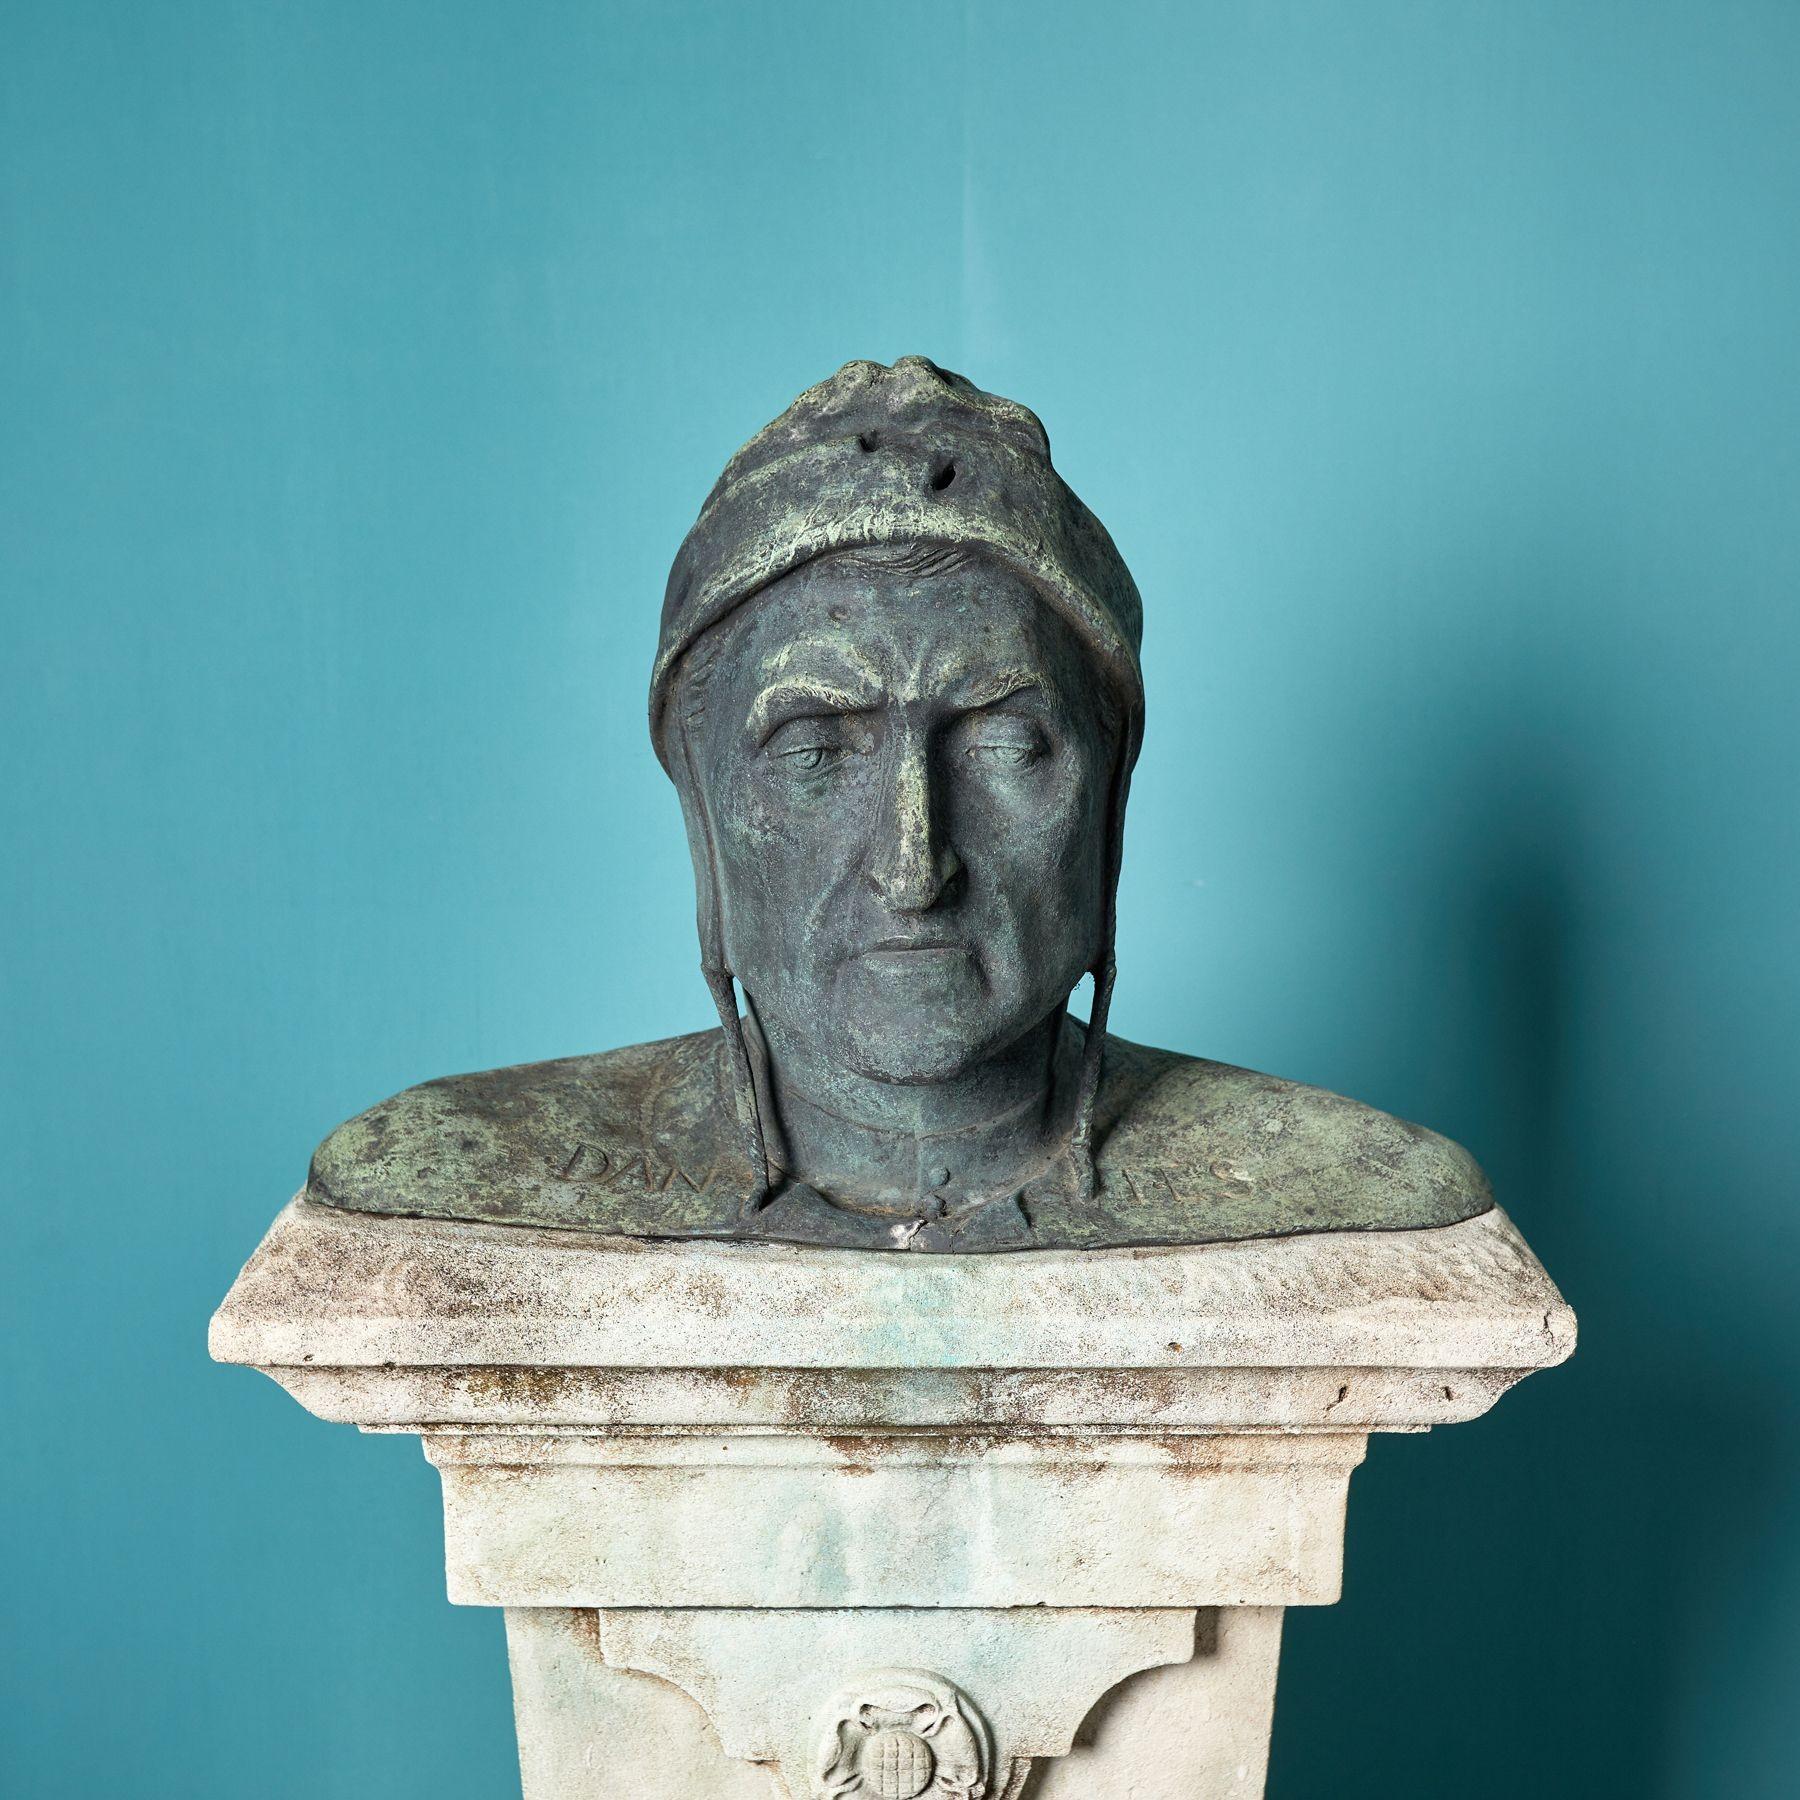 Antique Bronze Bust of Dante. A powerful bust of the Italian philosopher and poet, Dante, raised on a Limestone pedestal. The Italian poet and scholar Dante Alighieri is best known for his masterpiece La Commedia (The Divine Comedy). This is